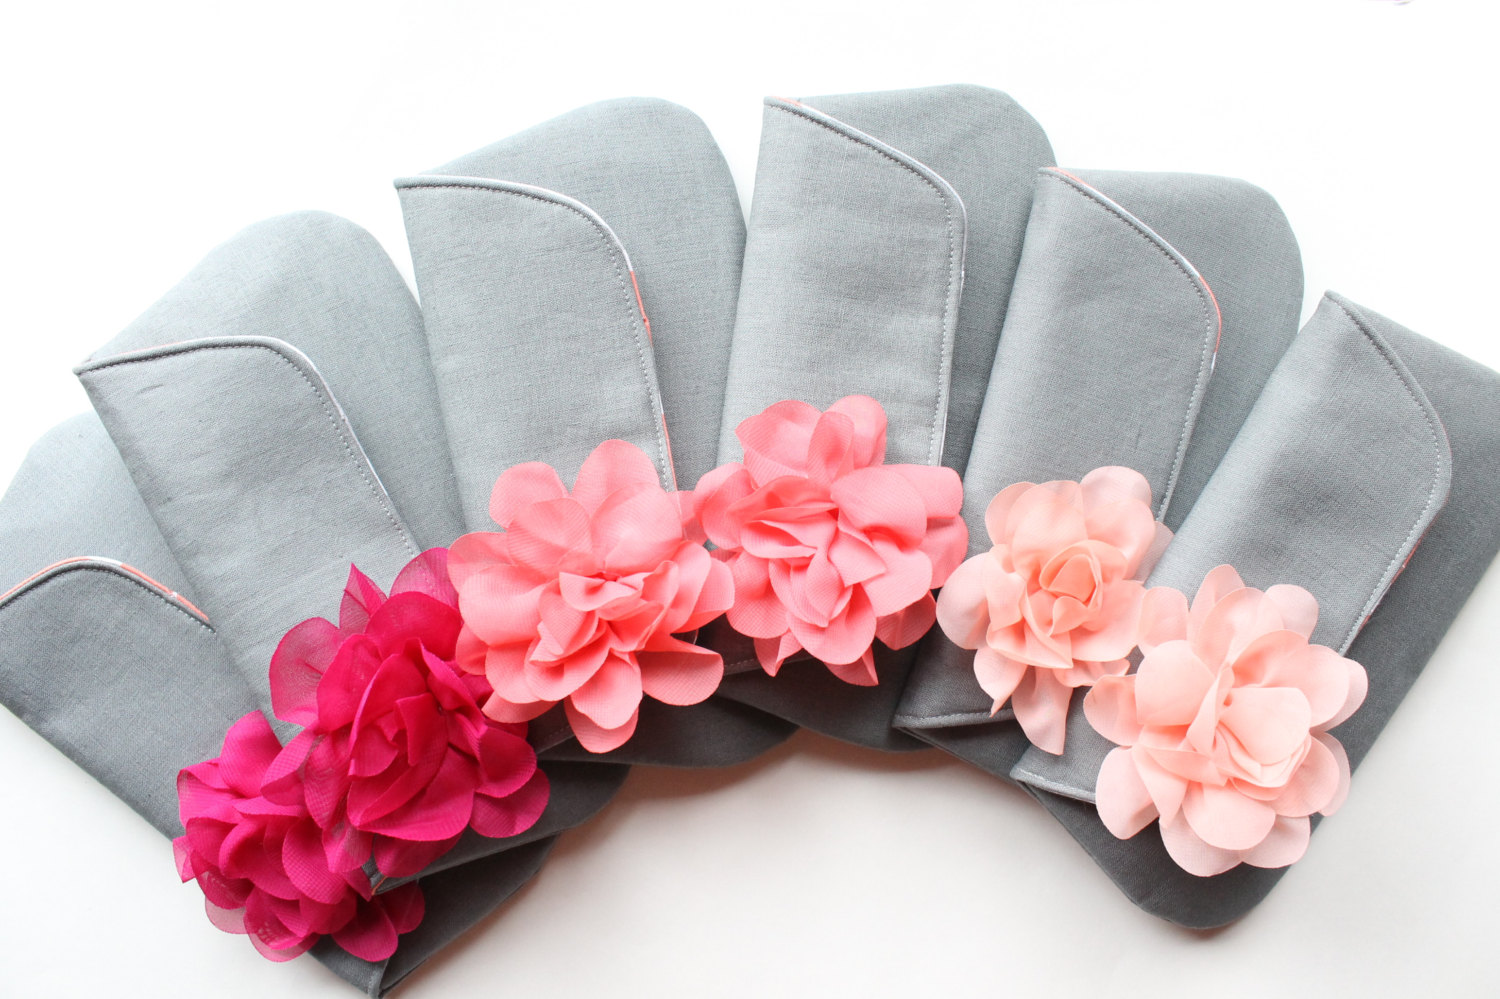 ombre pink and gray clutch purses | 7 Spring Wedding Clutches Your Girls Will Love via emmalinebride.com